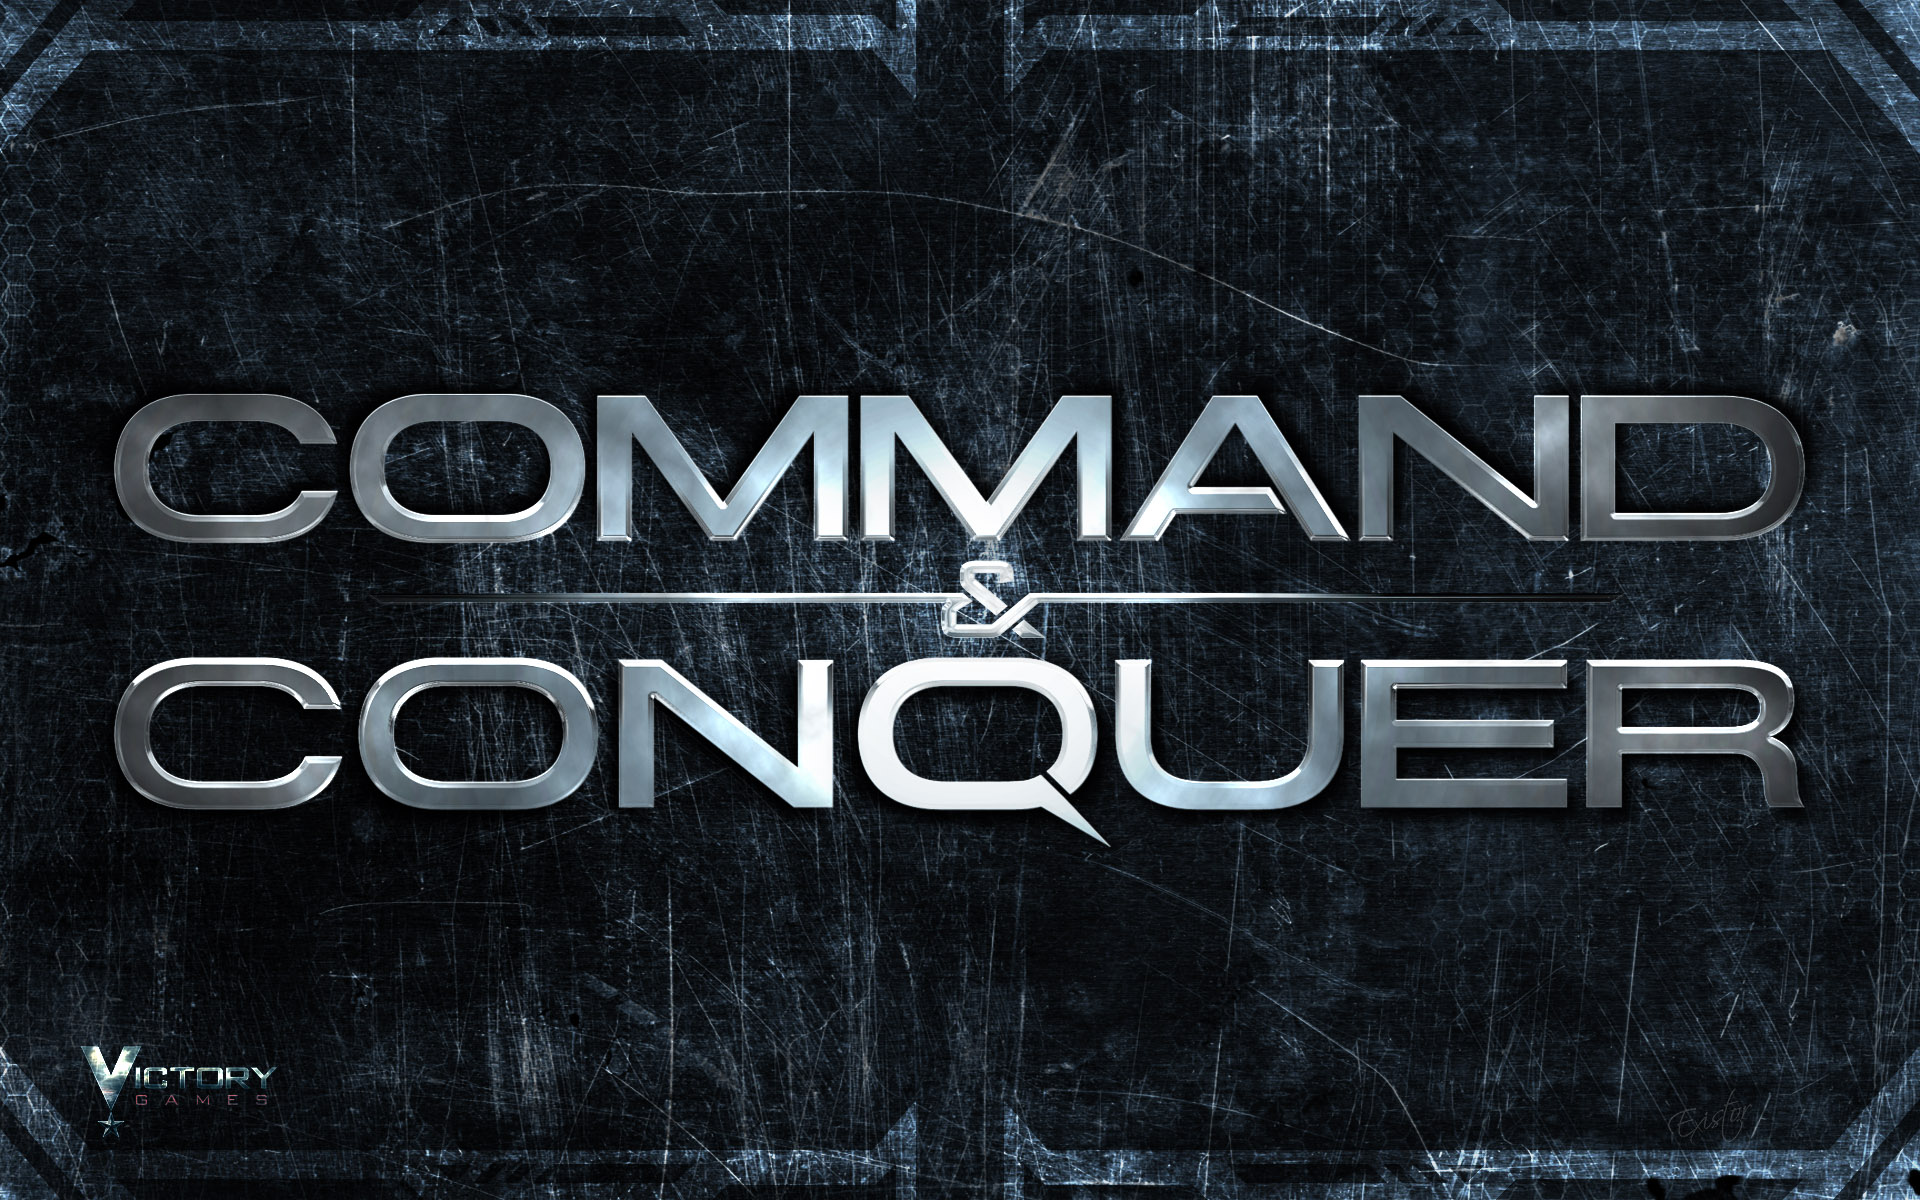 Steam command and conquer collection фото 62